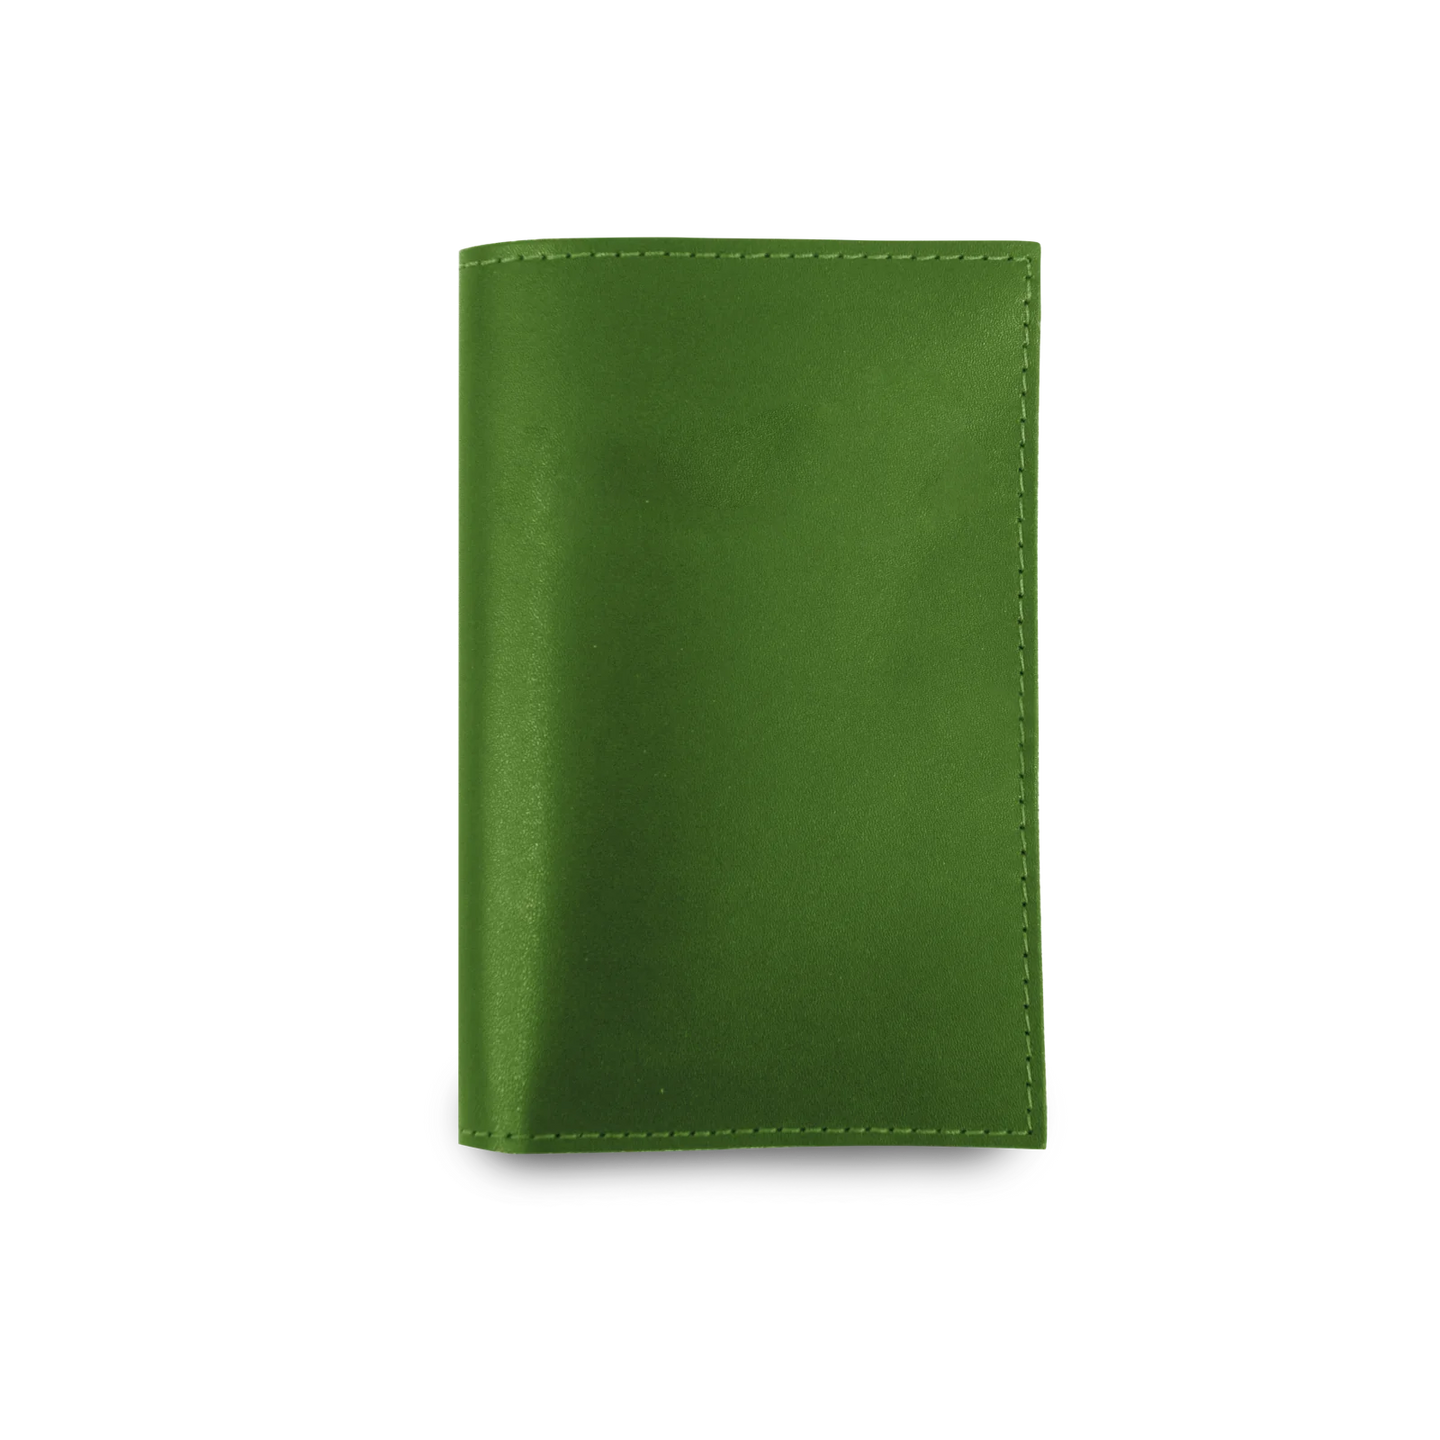 Passport Cover - Shamrock Leather Front Angle in Color 'Shamrock Leather'  Edit alt text